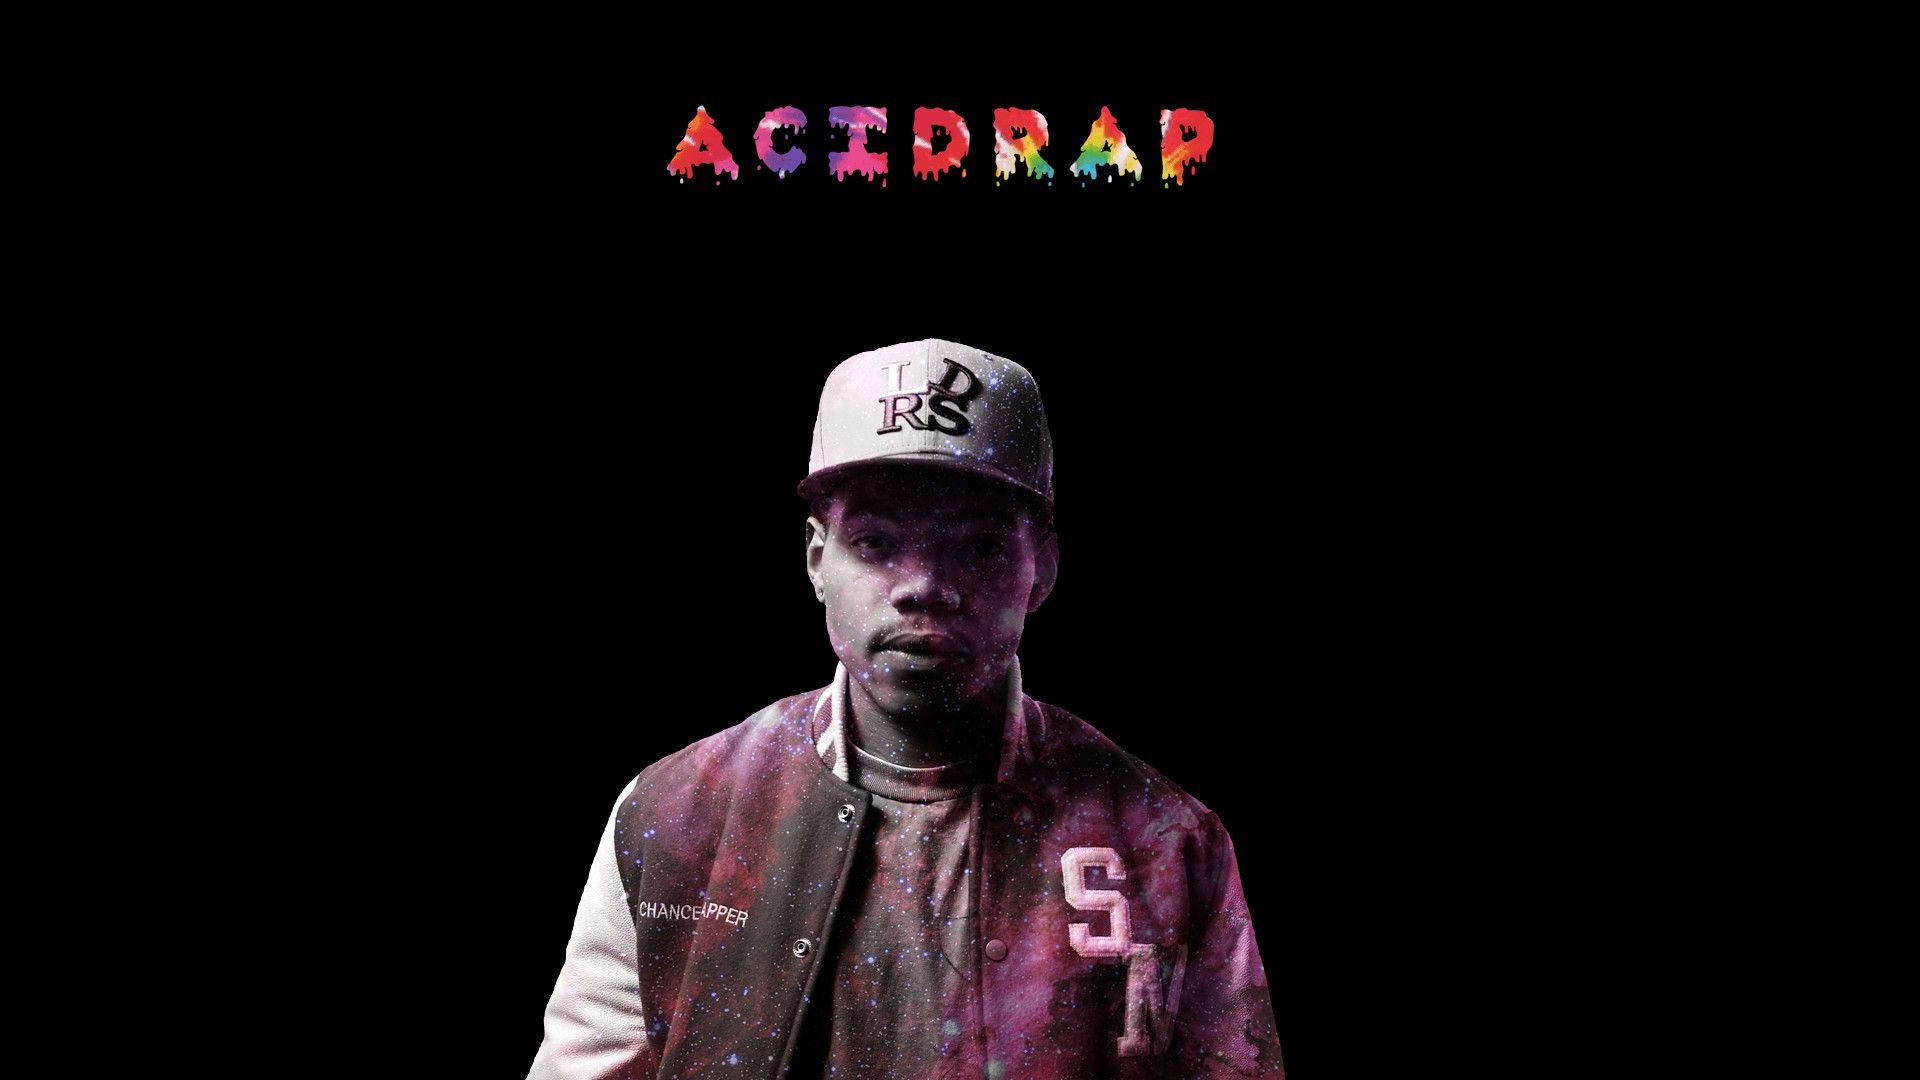 Aesthetic Rapper Pc Wallpapers